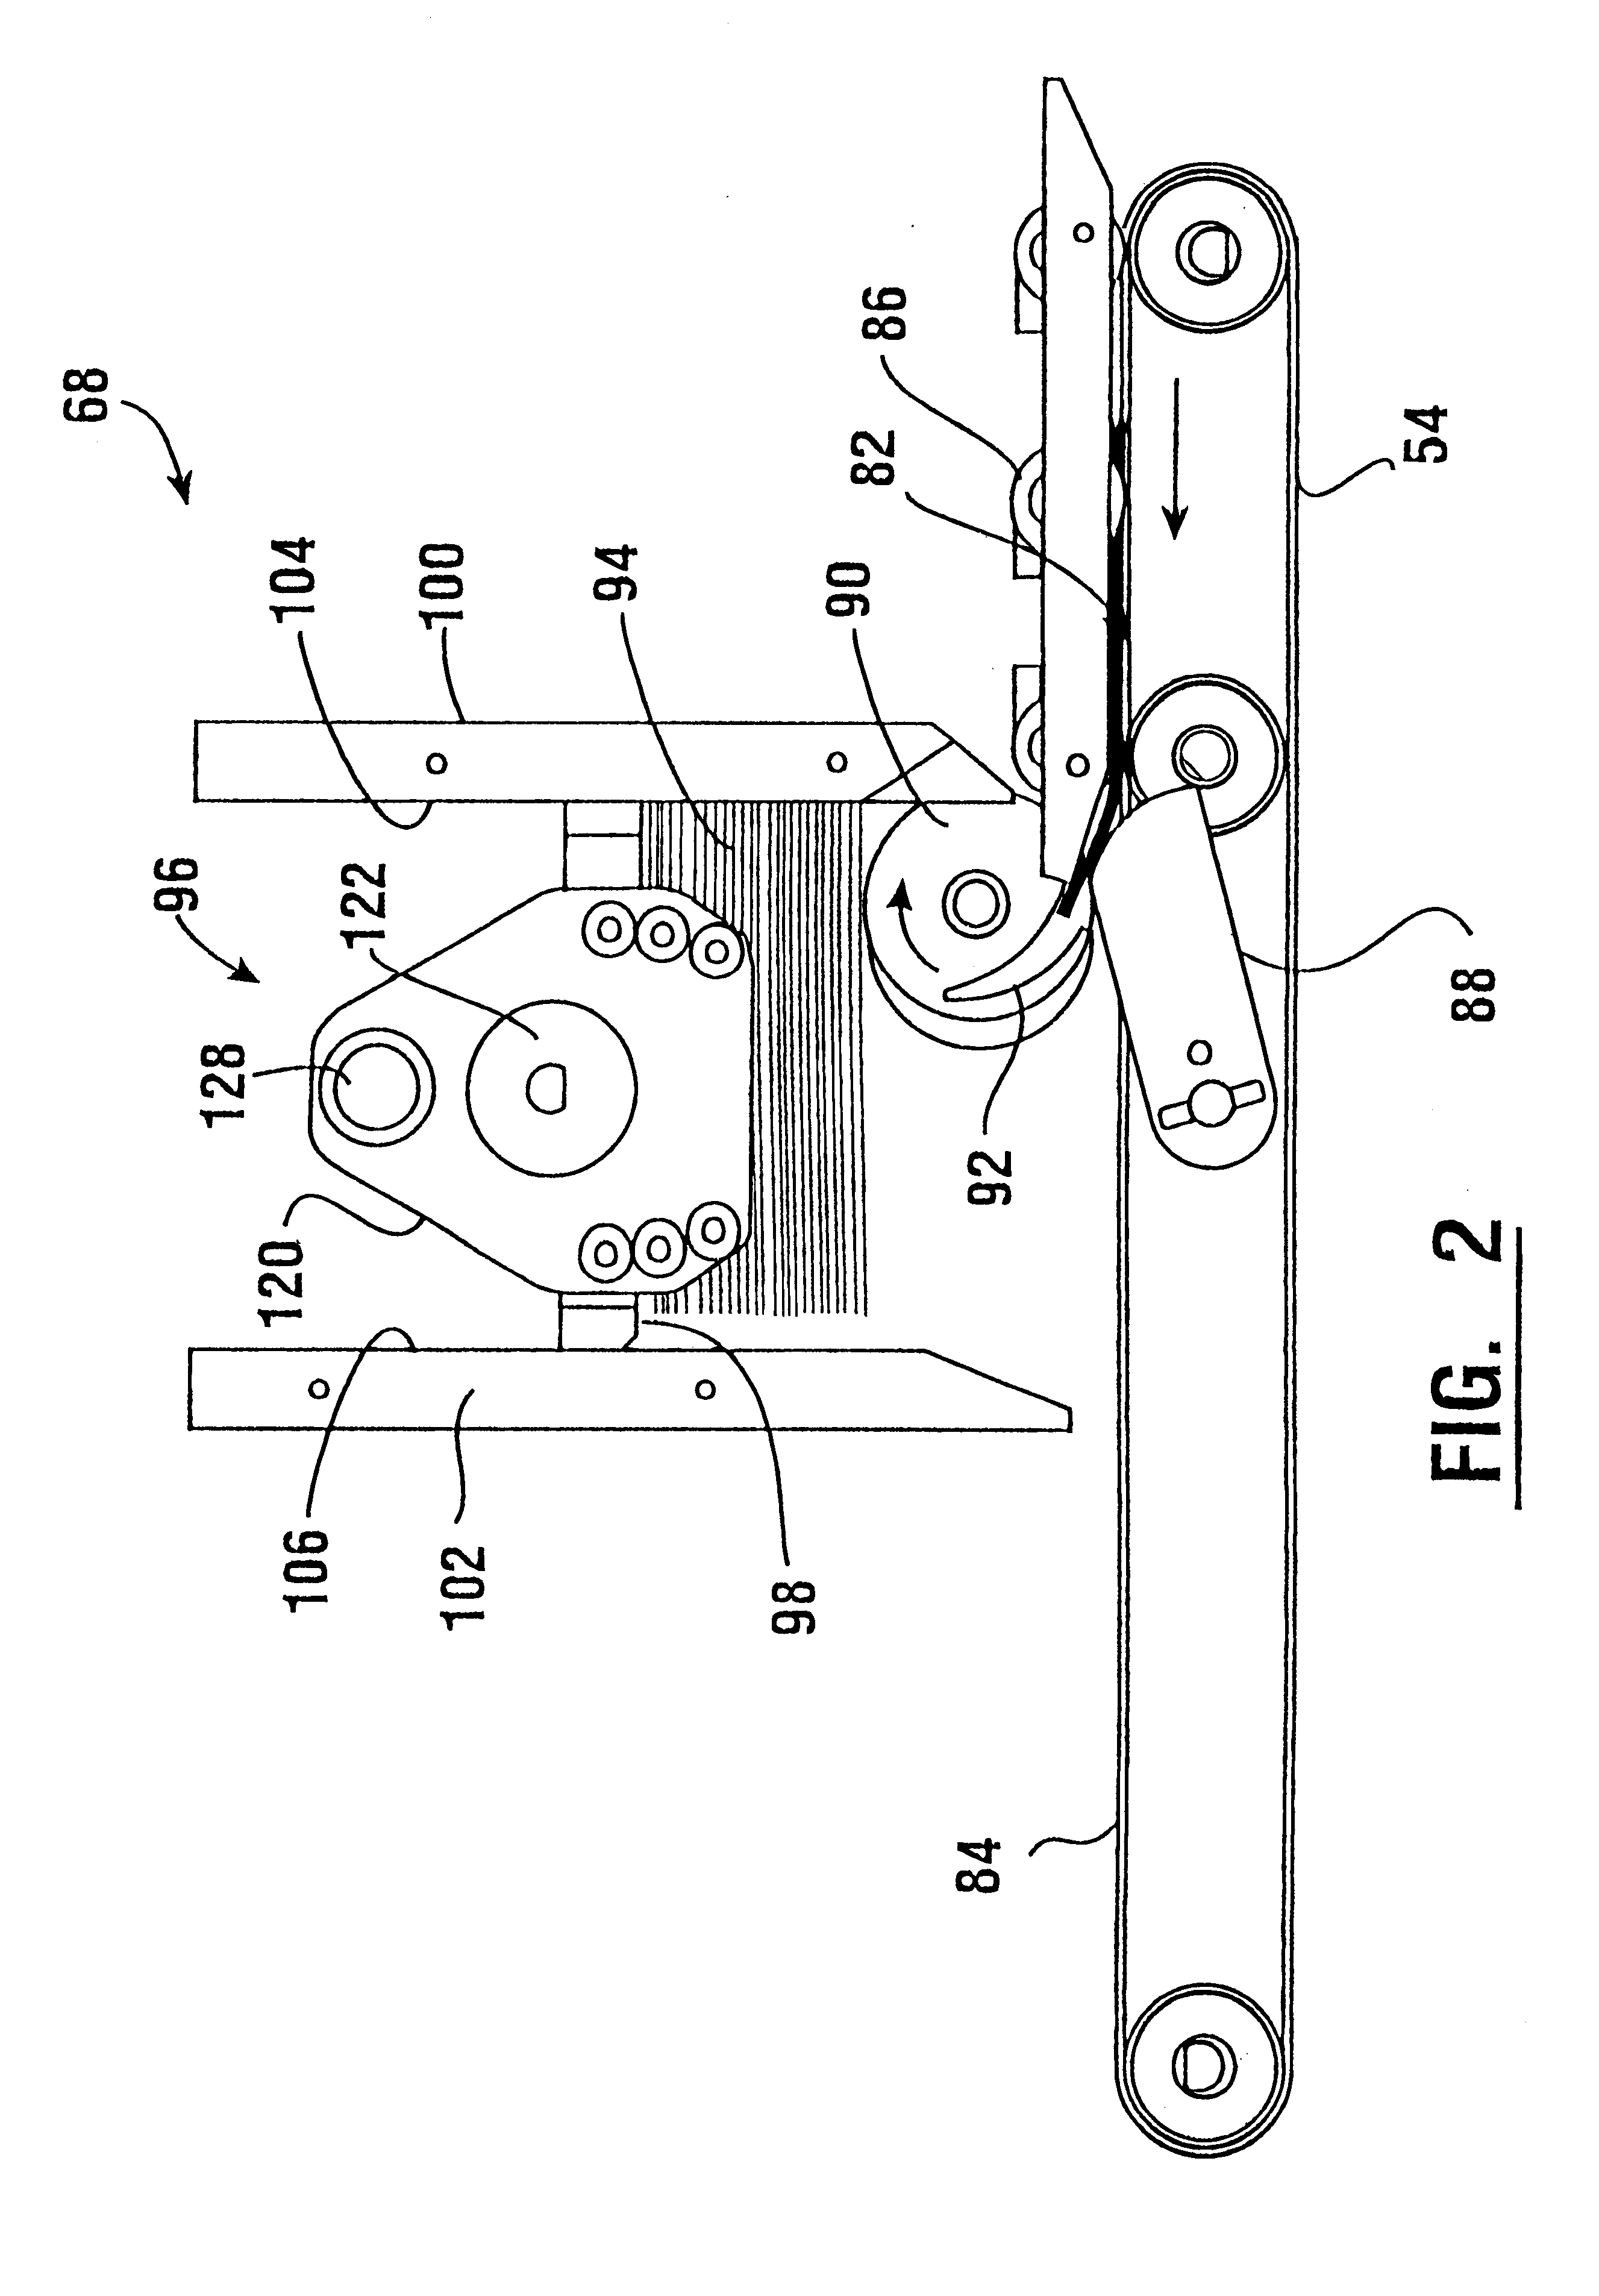 Currency recycling system and method for automated banking machine